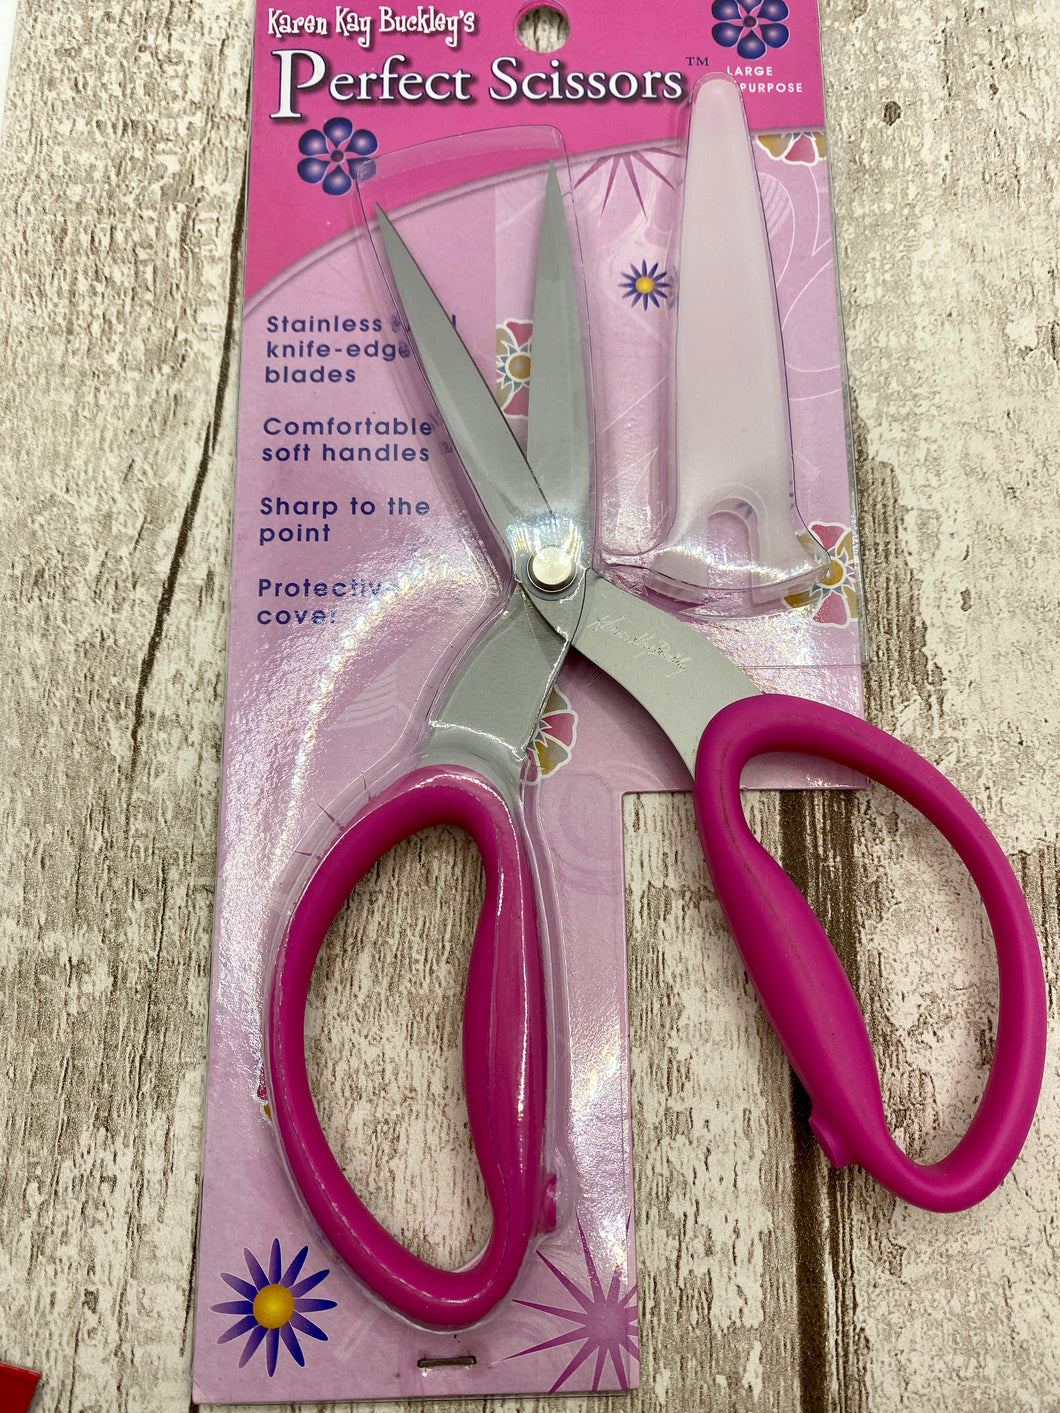 Karen Kay Buckley's Perfect Scissors - Large with Stainless steel knife-edge blades